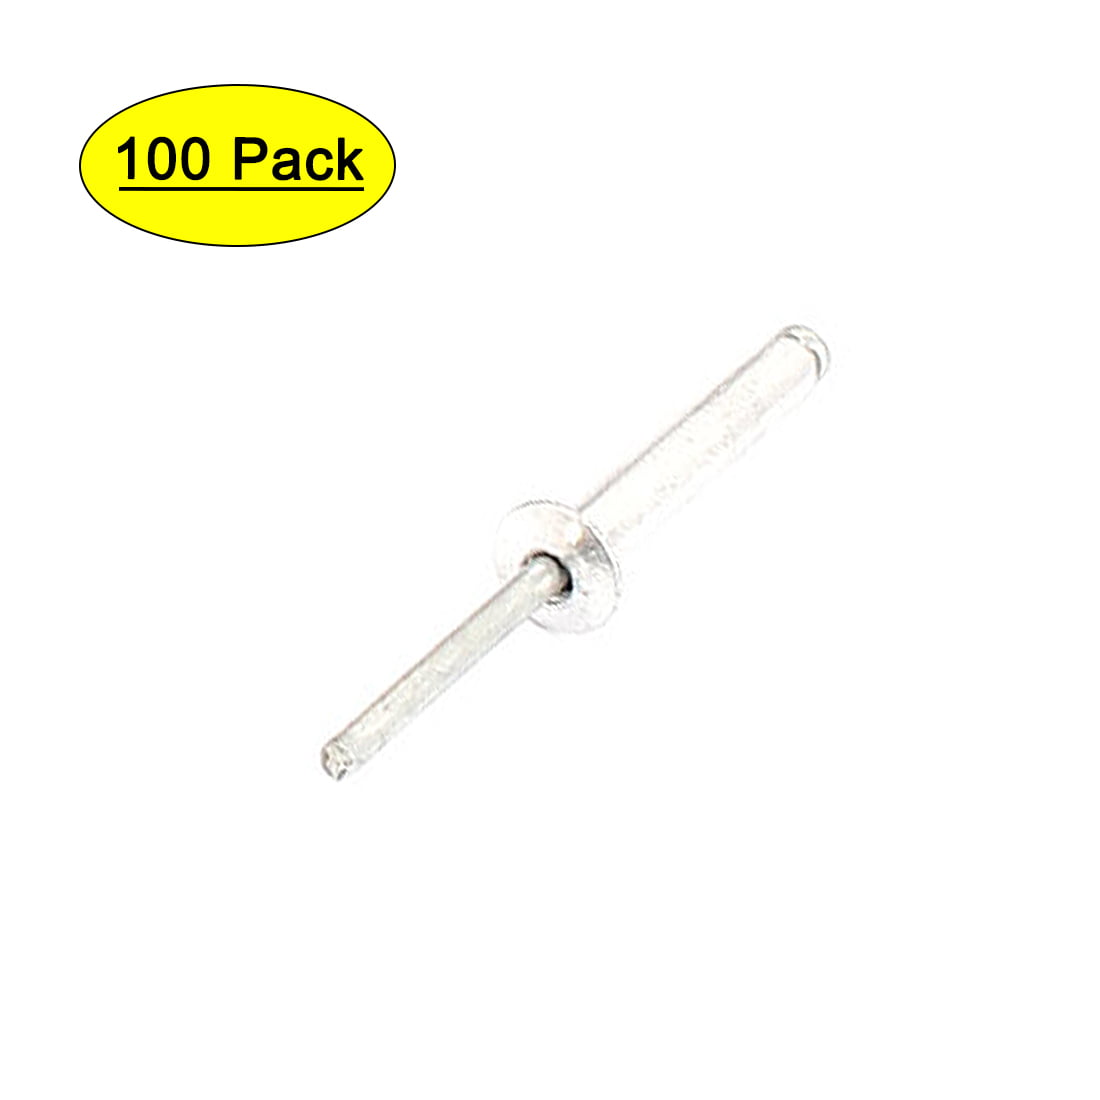 50PK Stainless Stem Pop Rivets Dome Open stainless Body 4.8mm x 30mm Blind 